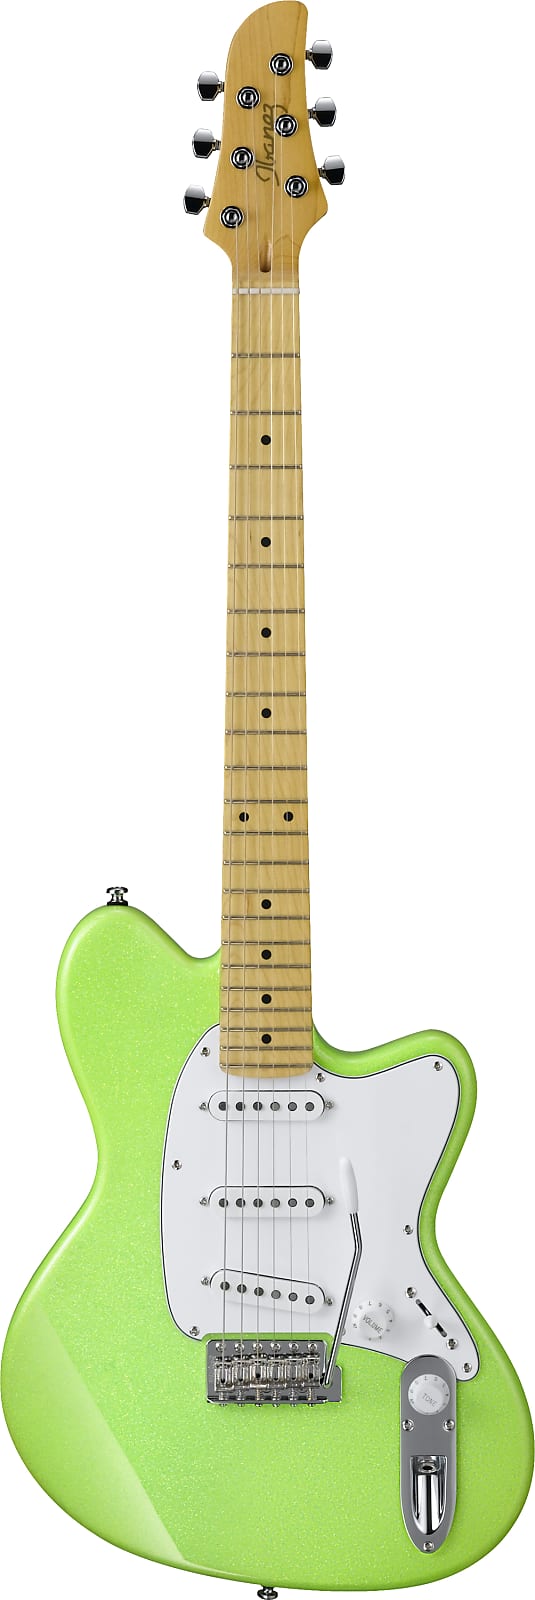 Ibanez YY10 Yvette Young Signature Electric Guitar Slime Green Sparkle